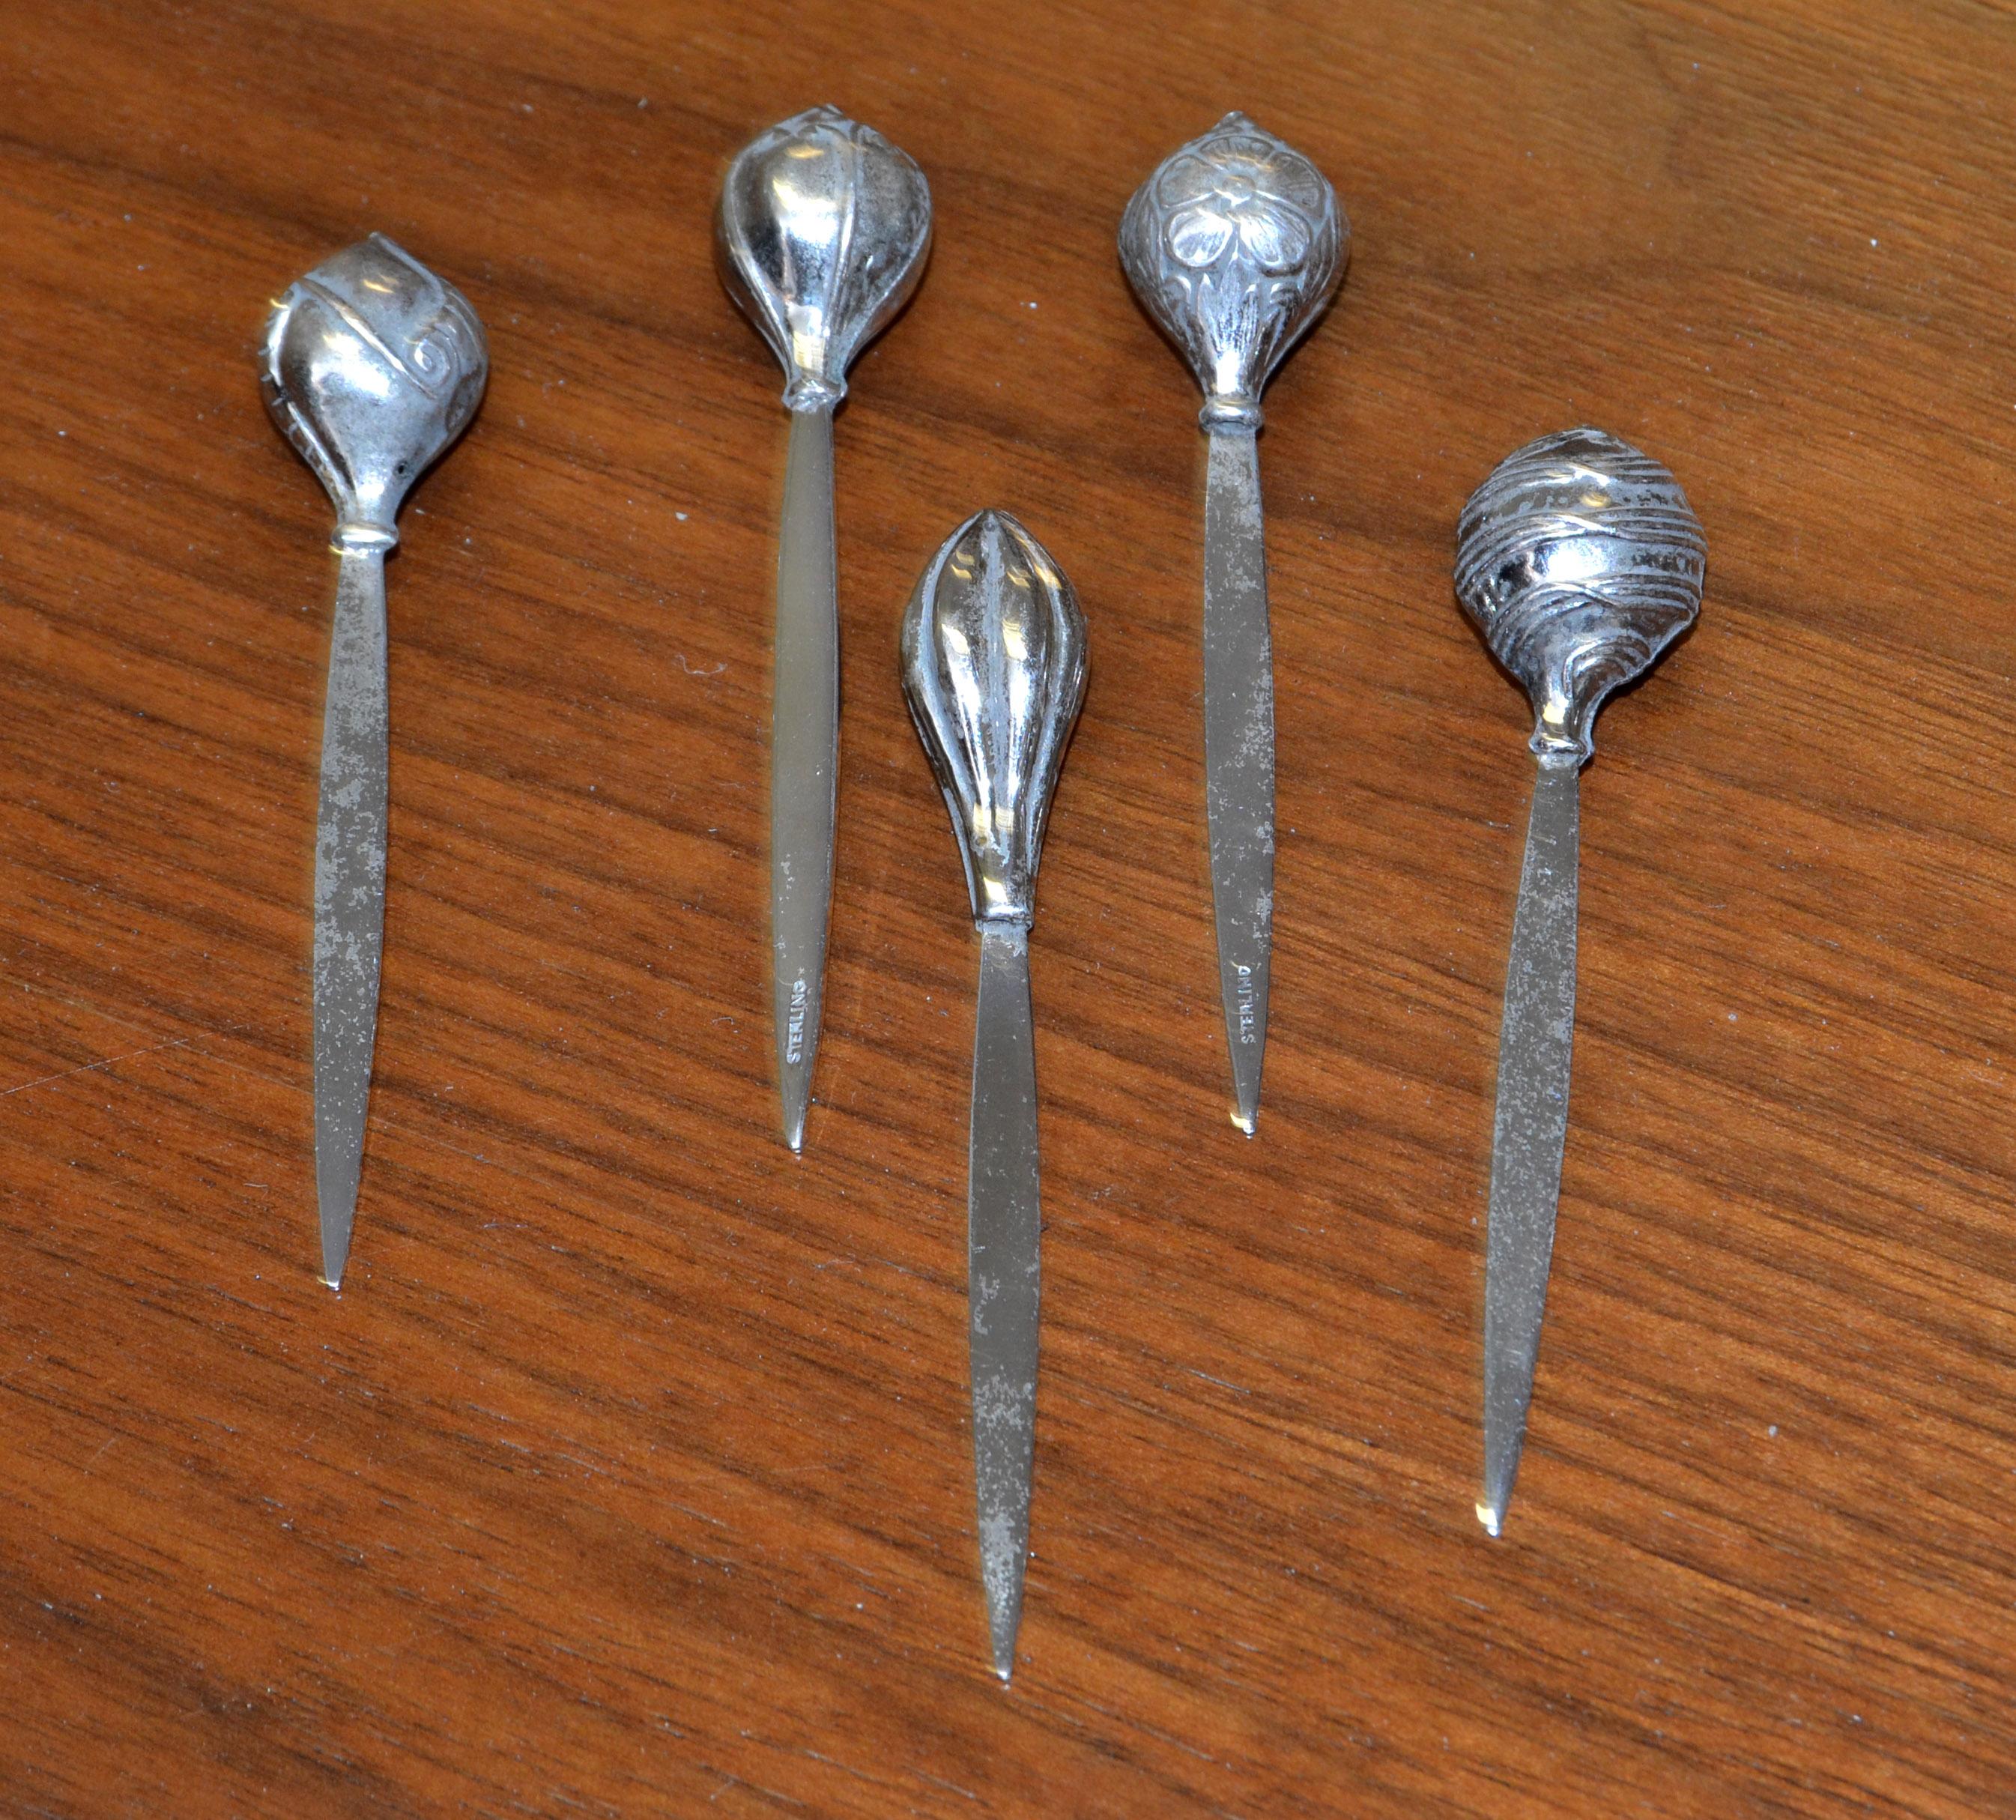 Set of 5 sterling silver charming Art Deco style cocktail appetizer picks. These picks feature 5 different large bulb finials that have a raised, 3-D like texture to them. We tried to capture how unique the texture of each finial is by zooming